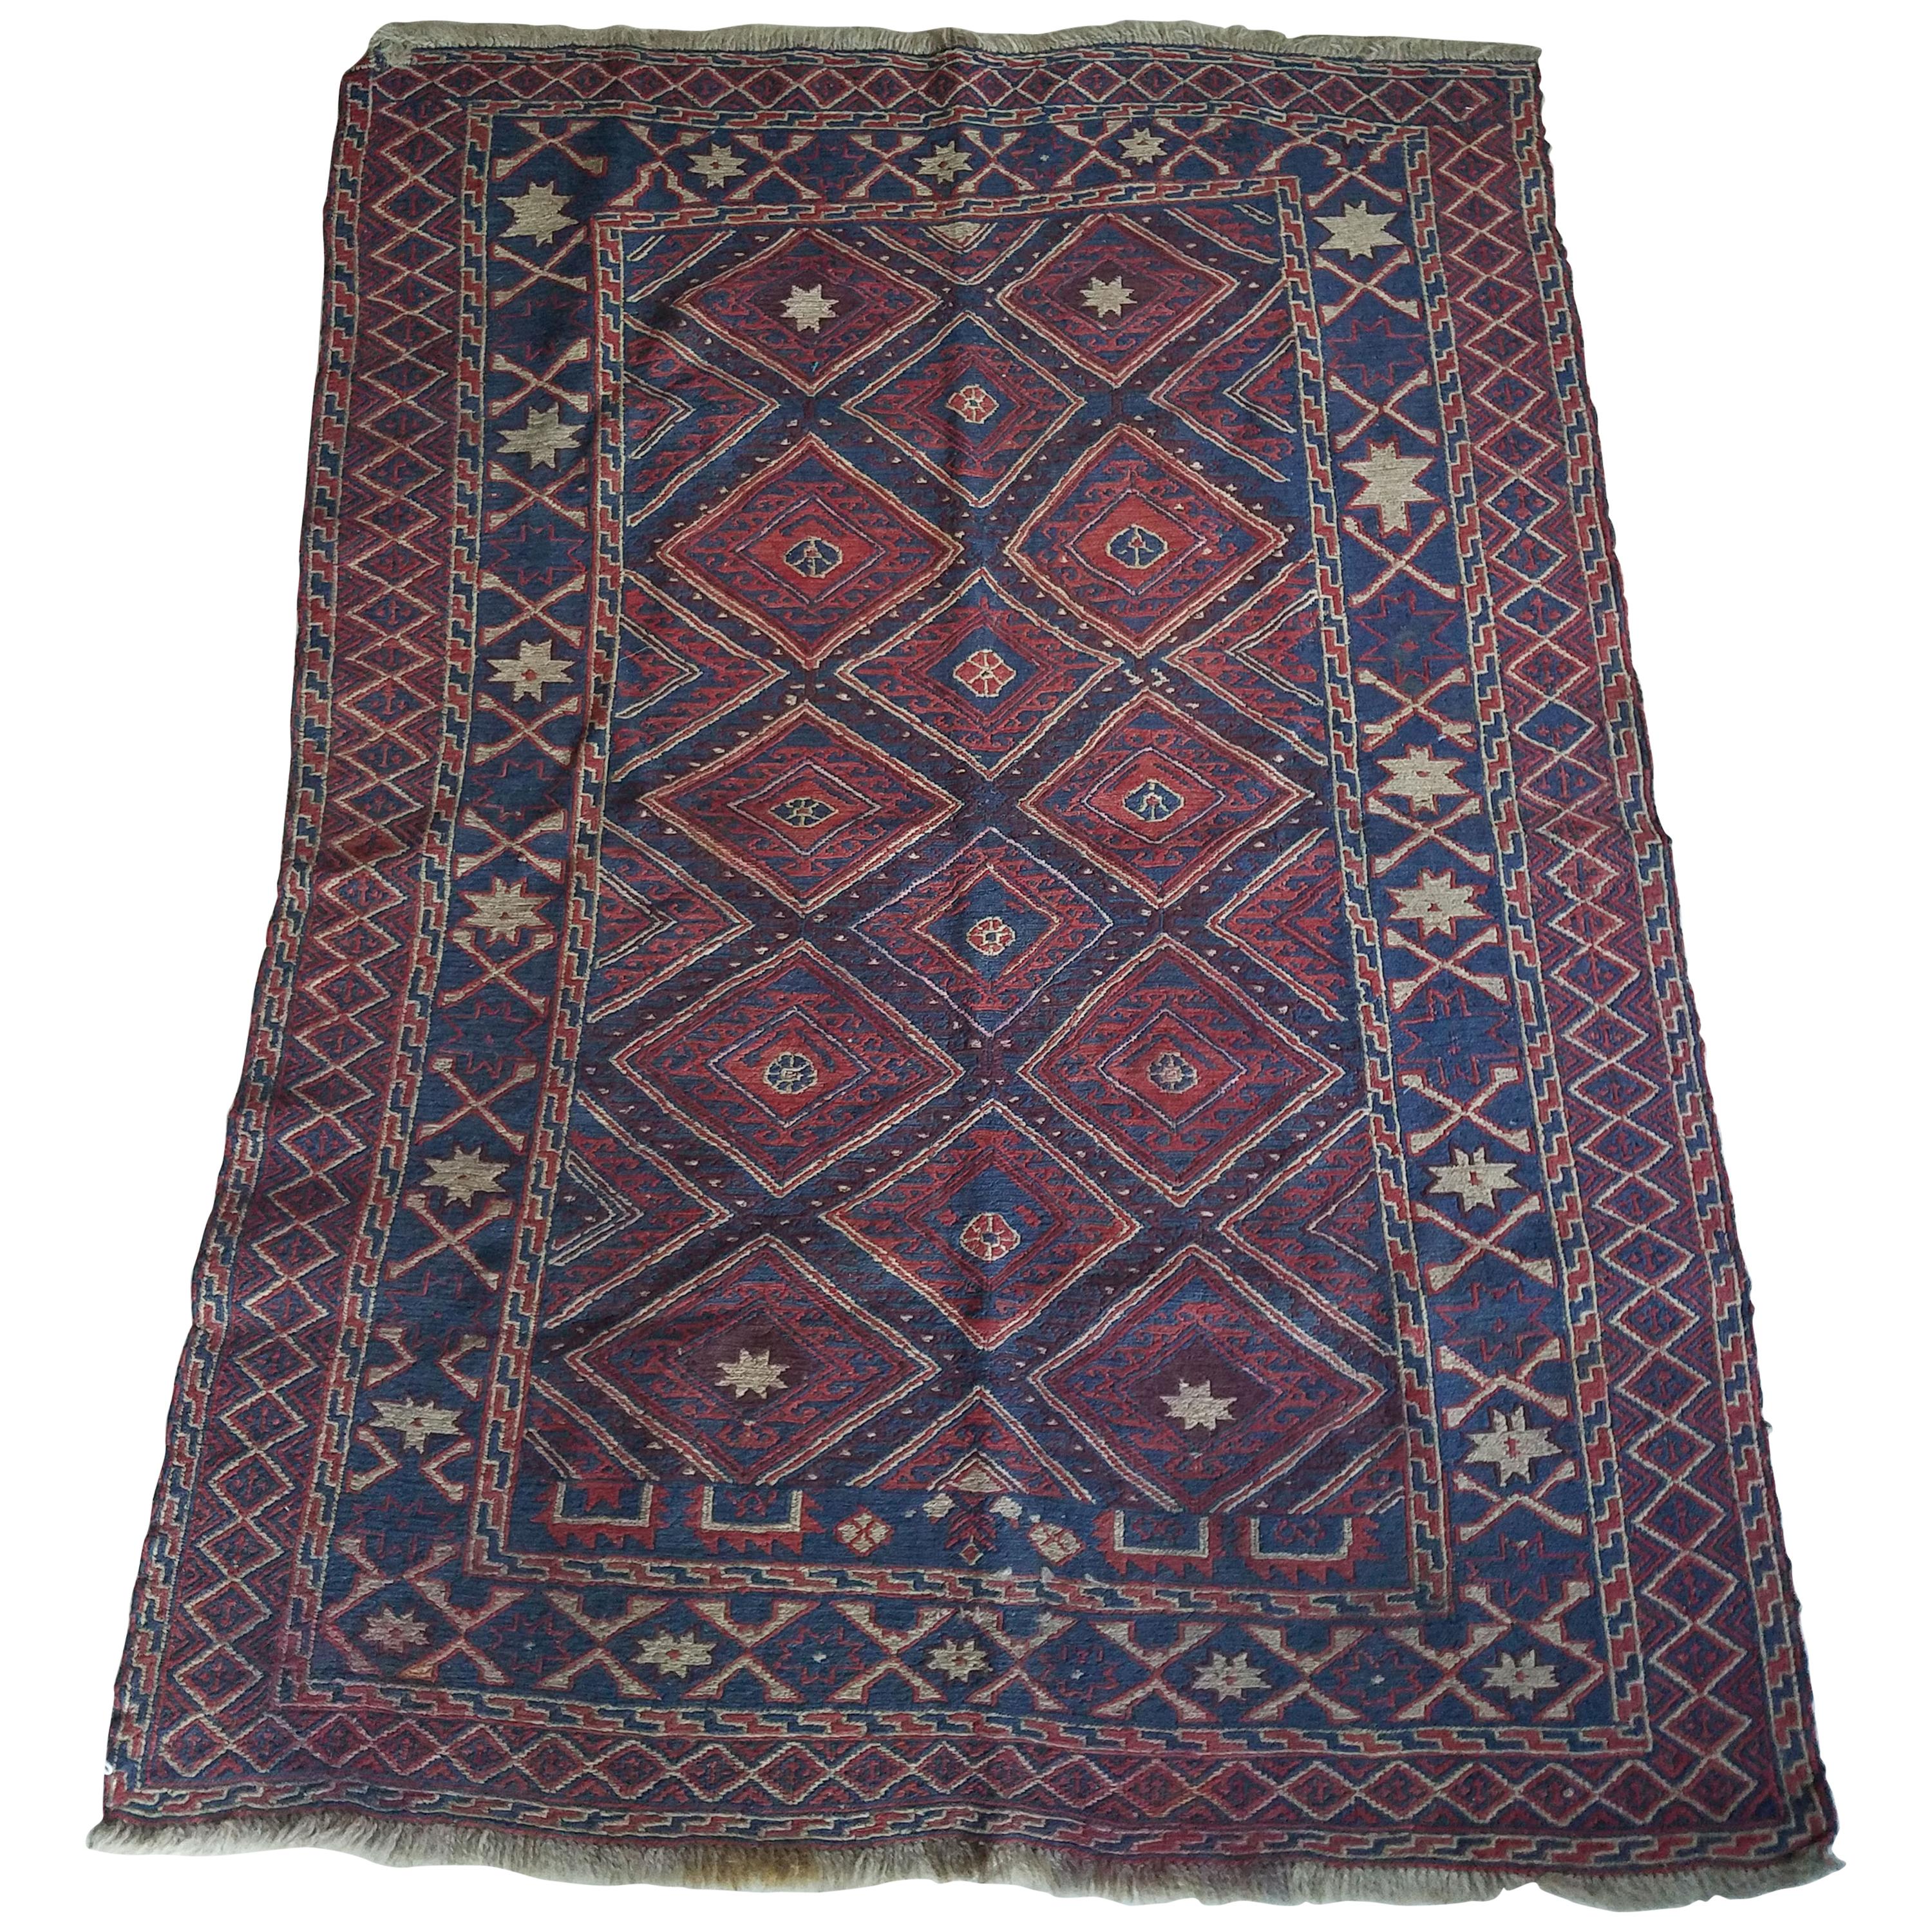 Another Beautiful Oriental Tribal Area Rug, Sar 7 For Sale